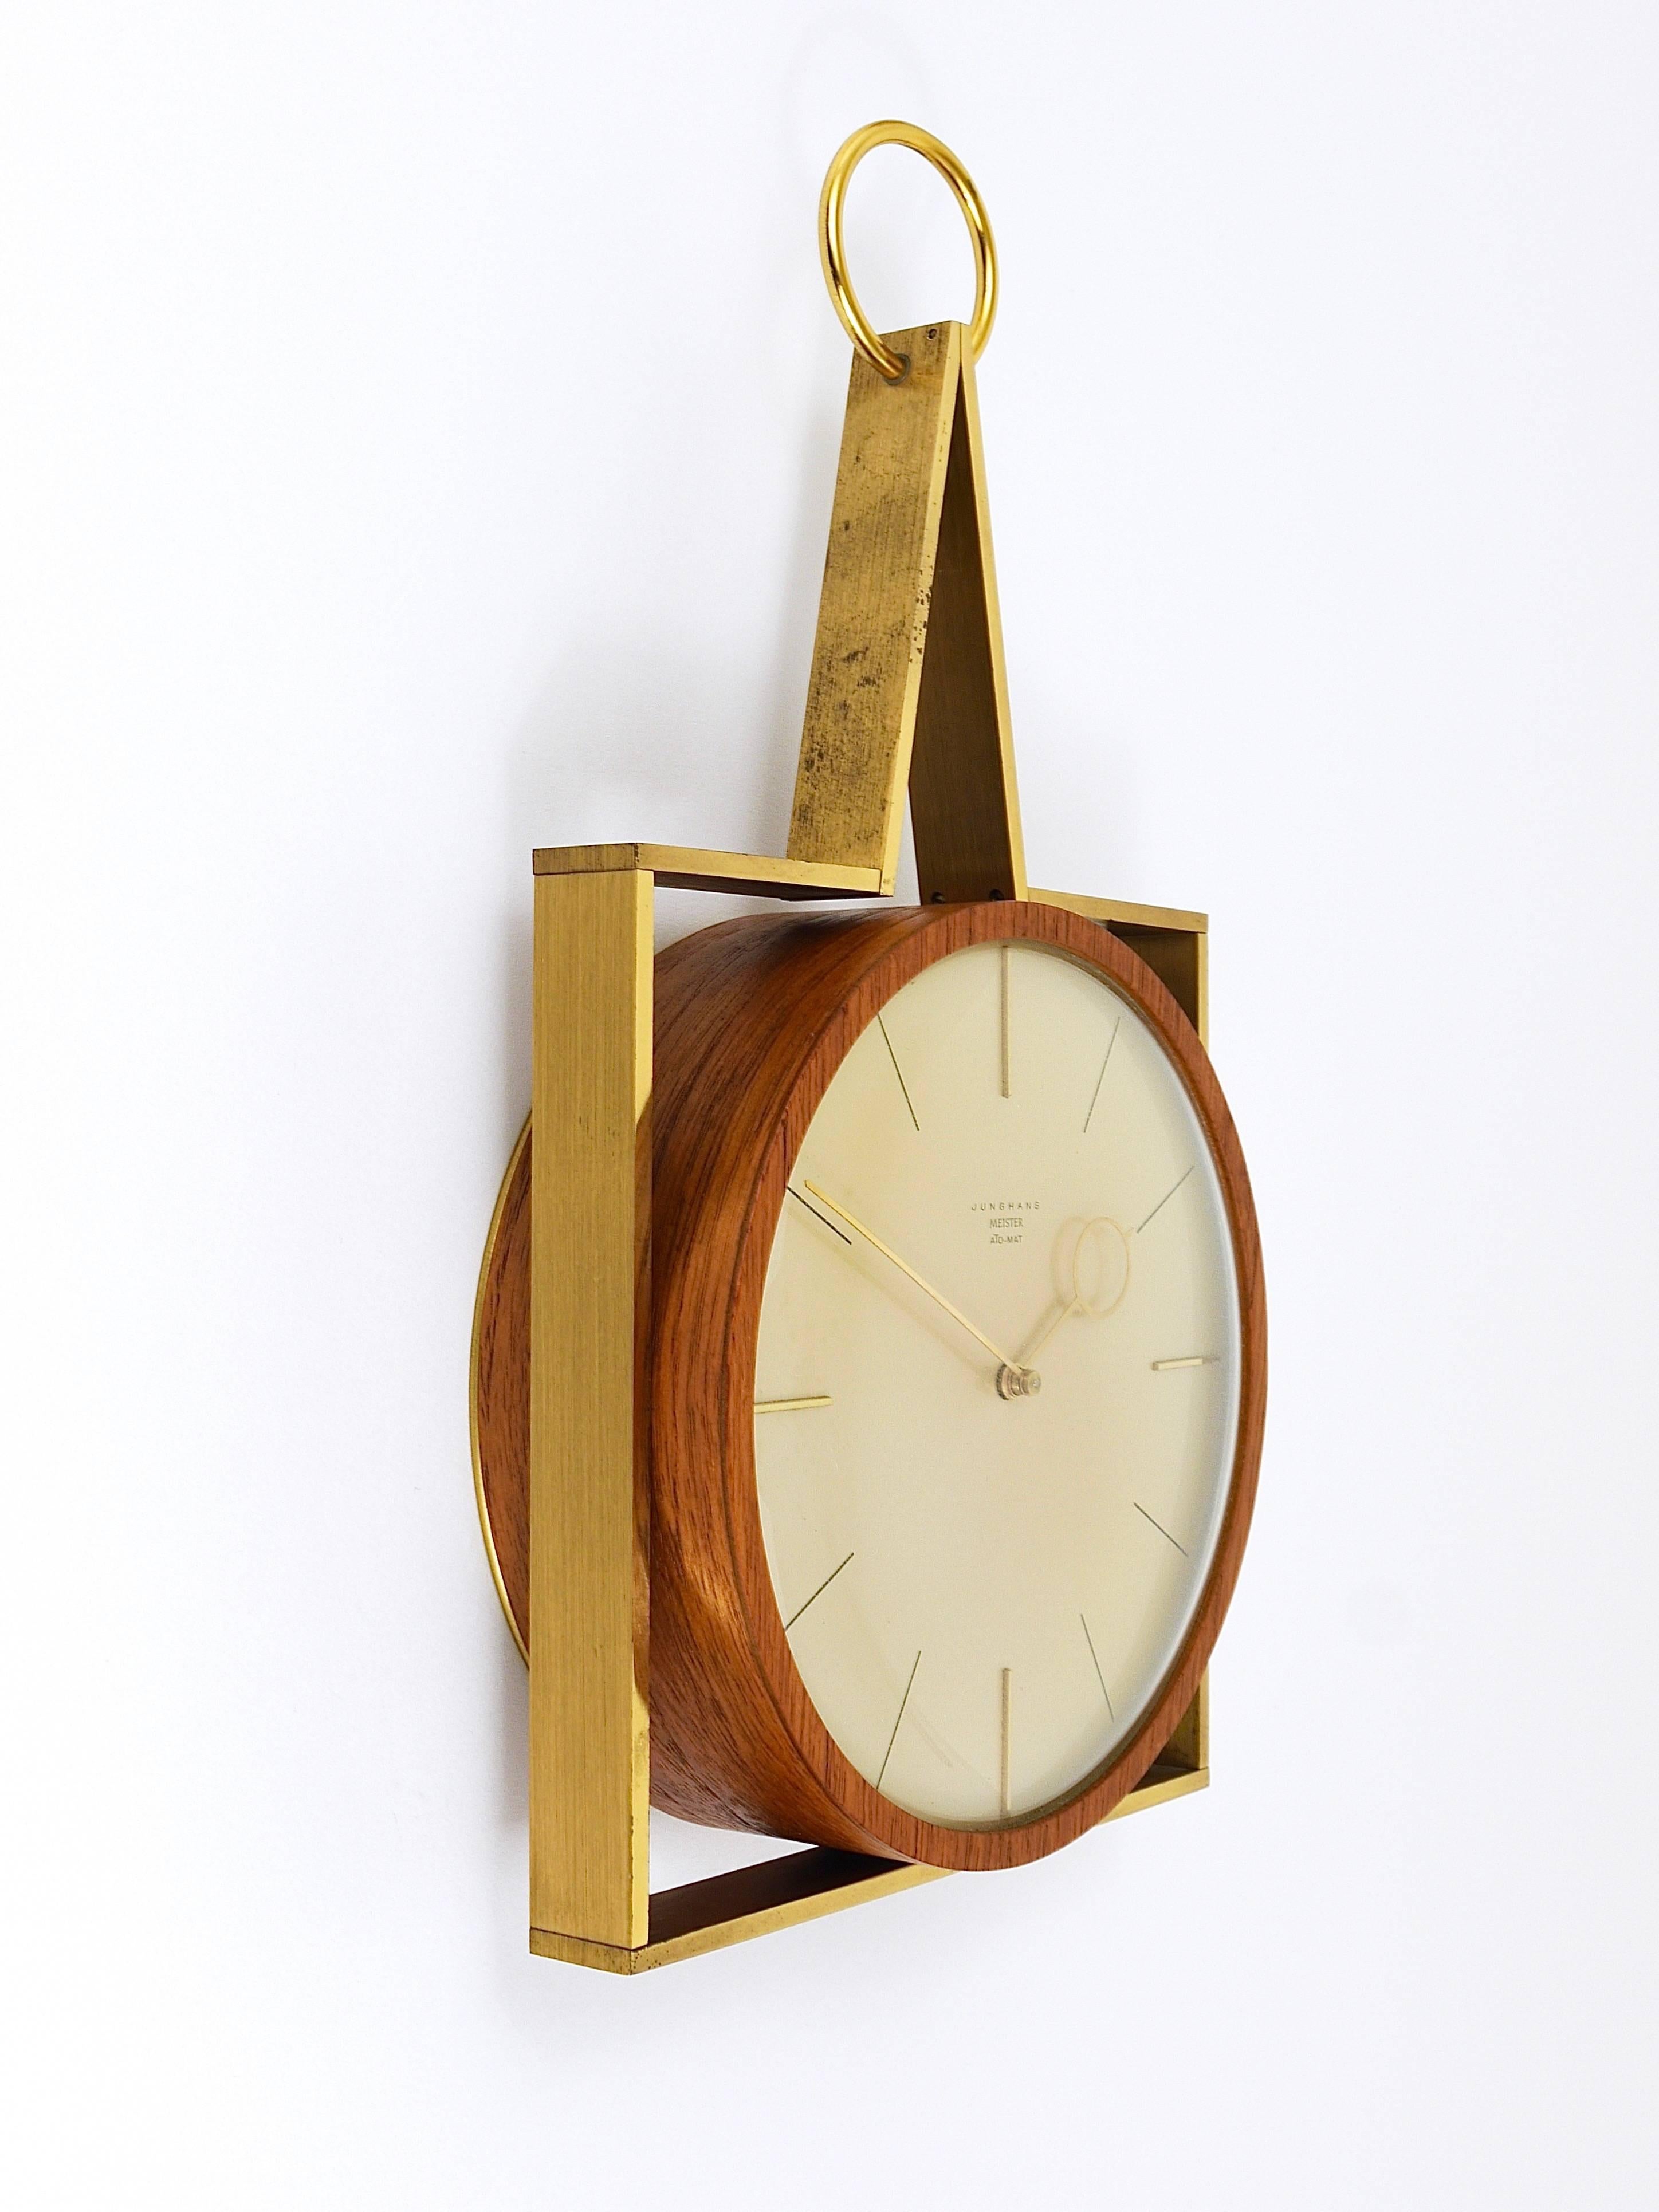 An elegant and straight modernist wall clock with beautiful brass hands, a round teak wood housing and a square brass frame around. Executed in the 1950s by Junghans Germany. Powered by its original battery-operated movement. In very good condition